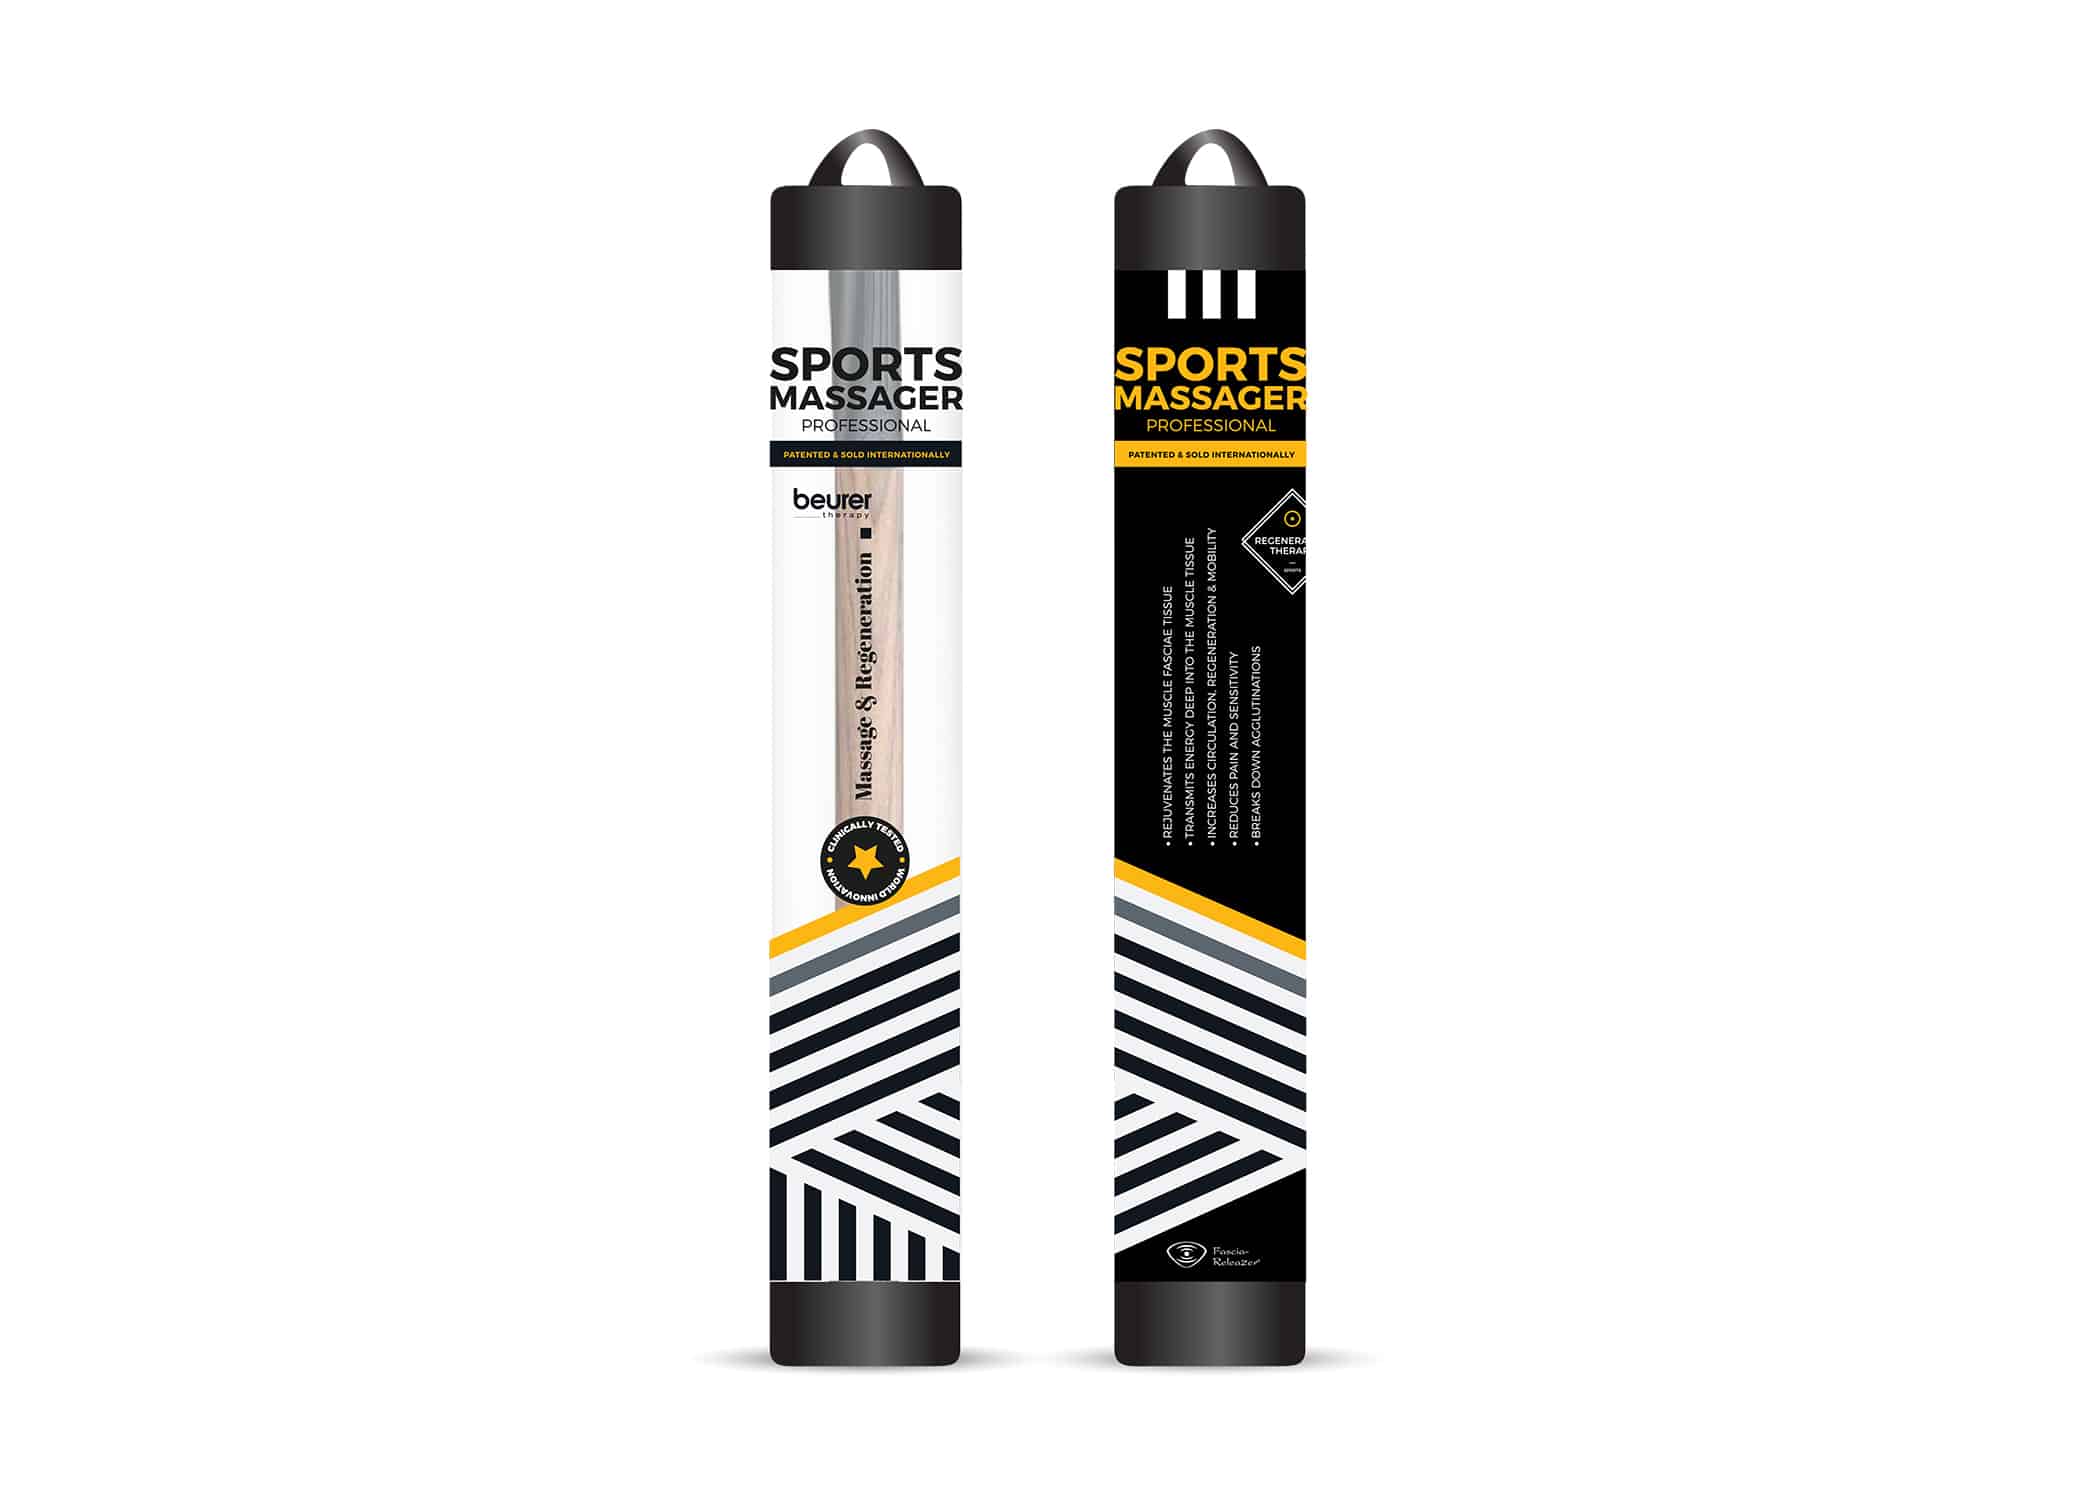 Beurer packaging design for fascia releaser product with black and white angled stripes and pops of yellow.